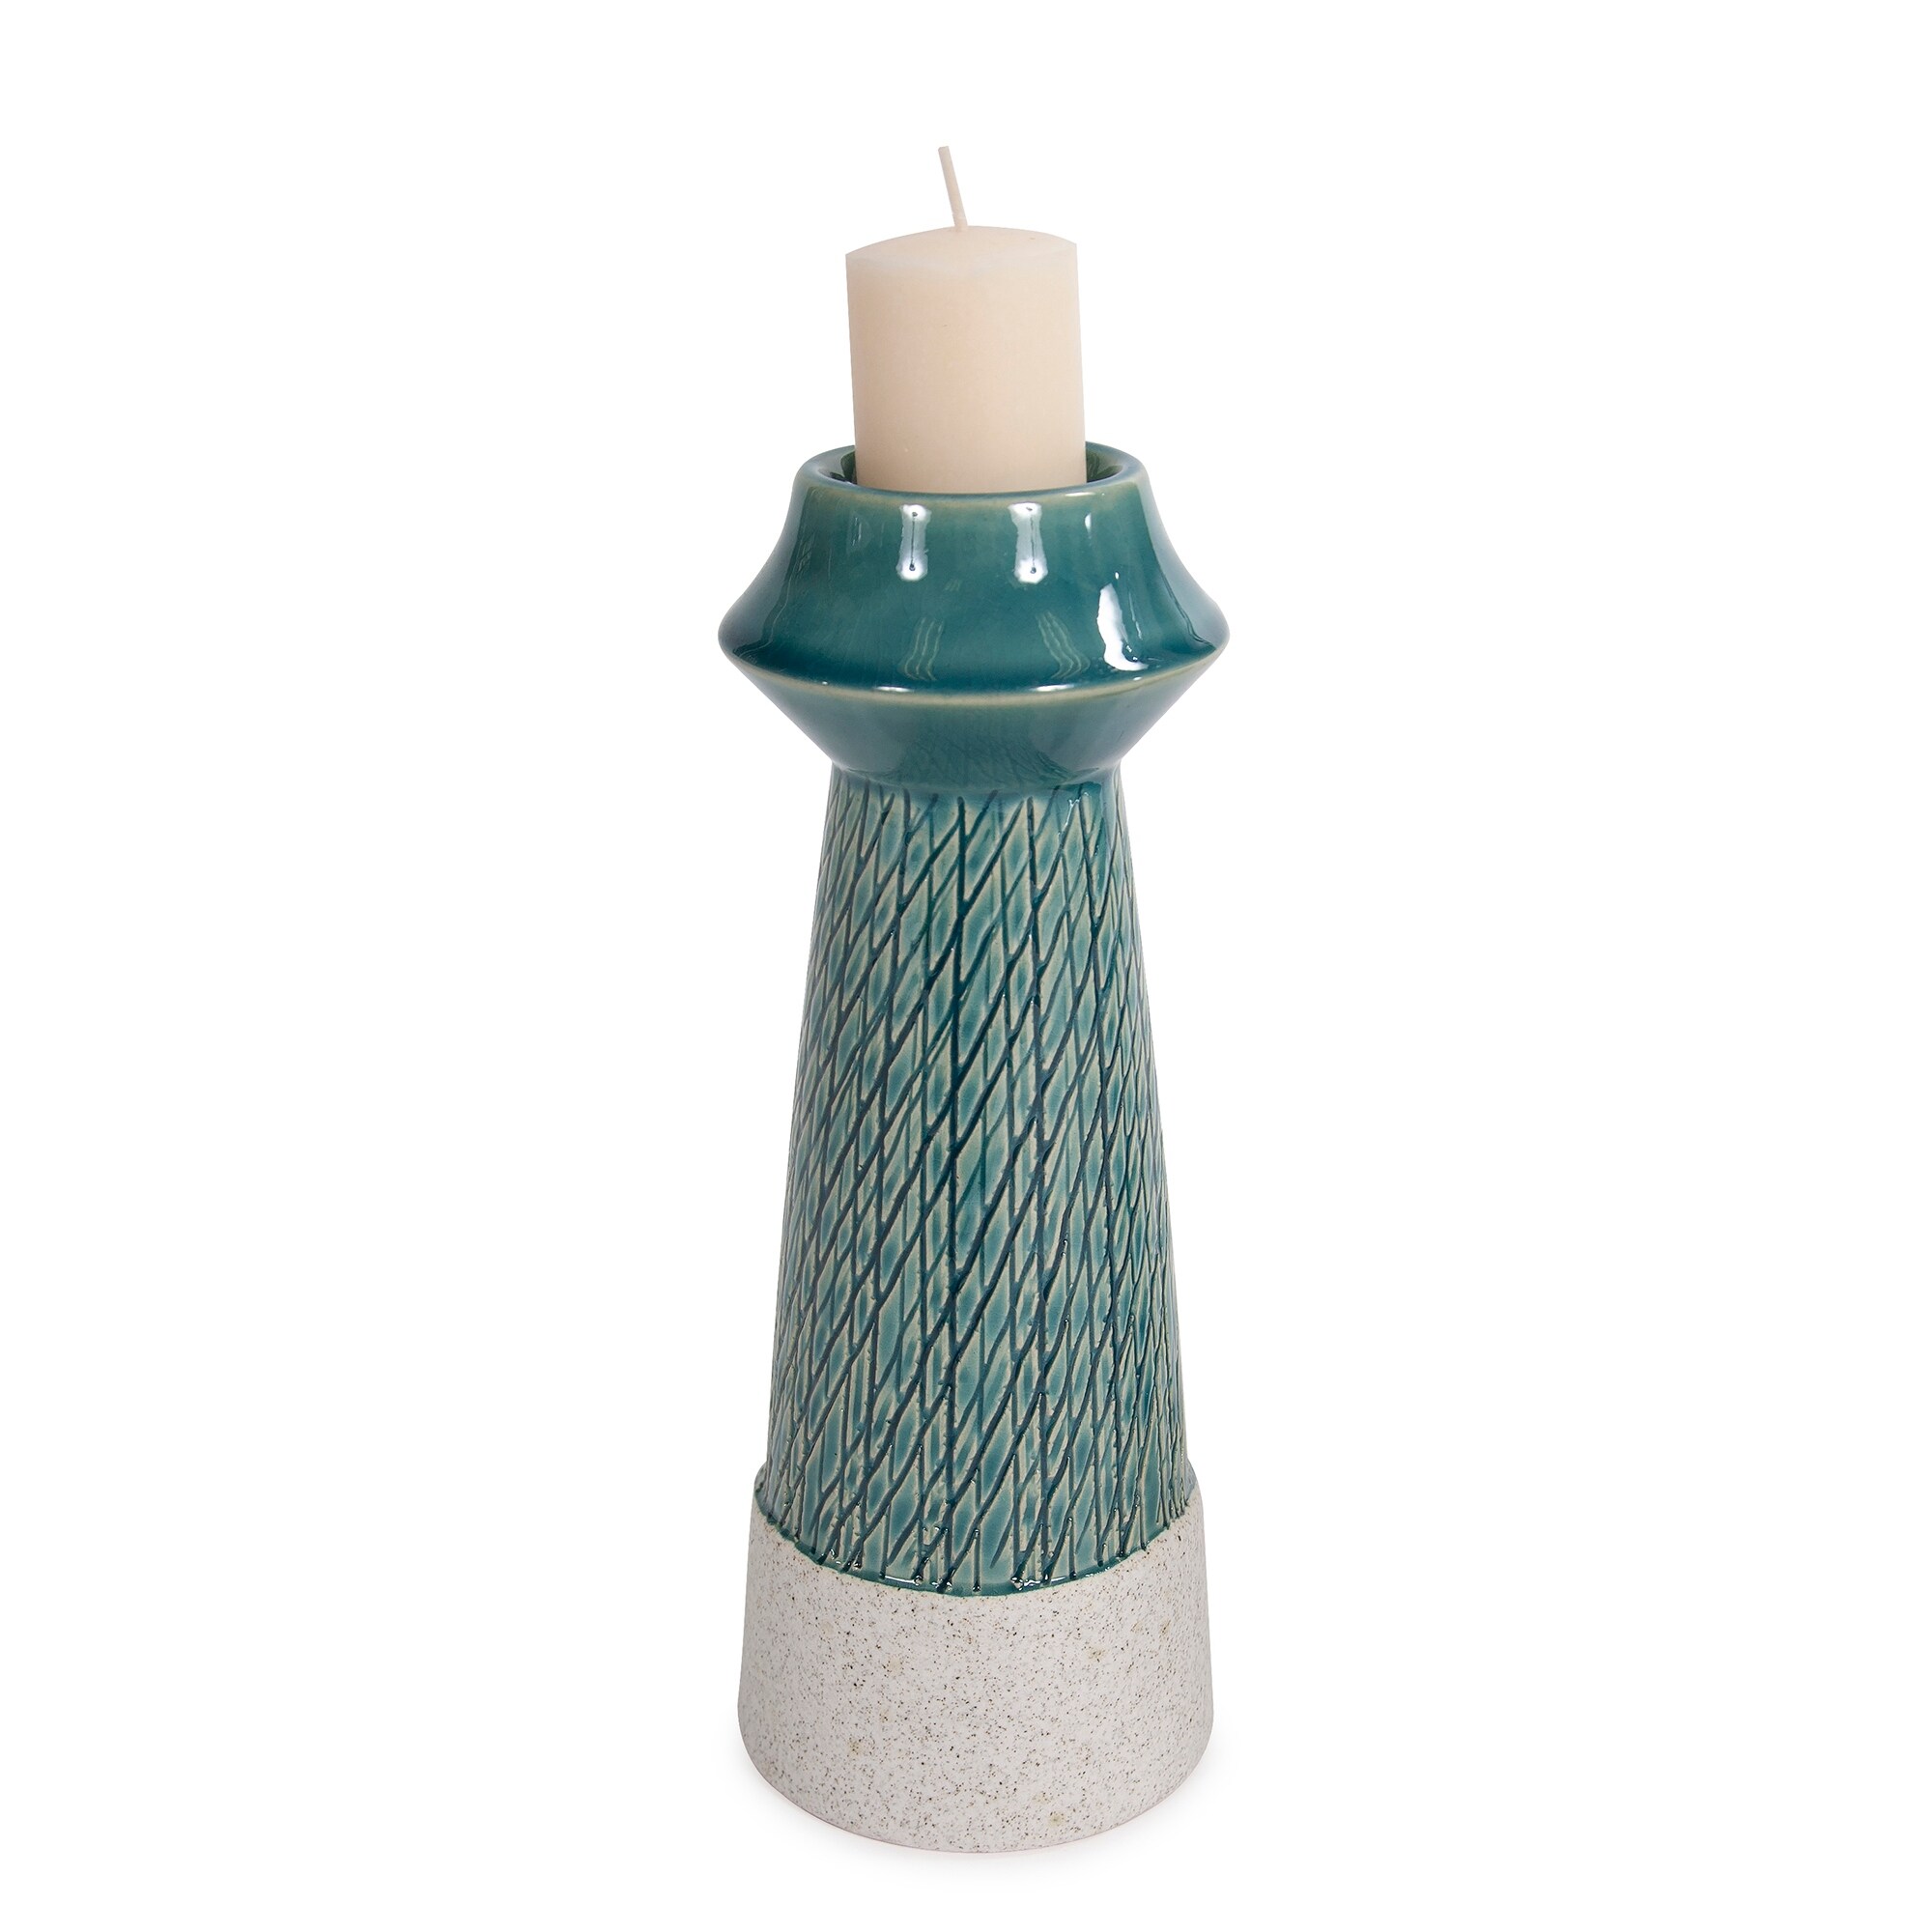 Cross Hatched Sea Blue Ceramic Candle Holder, Large - 9H x 3W x 3D